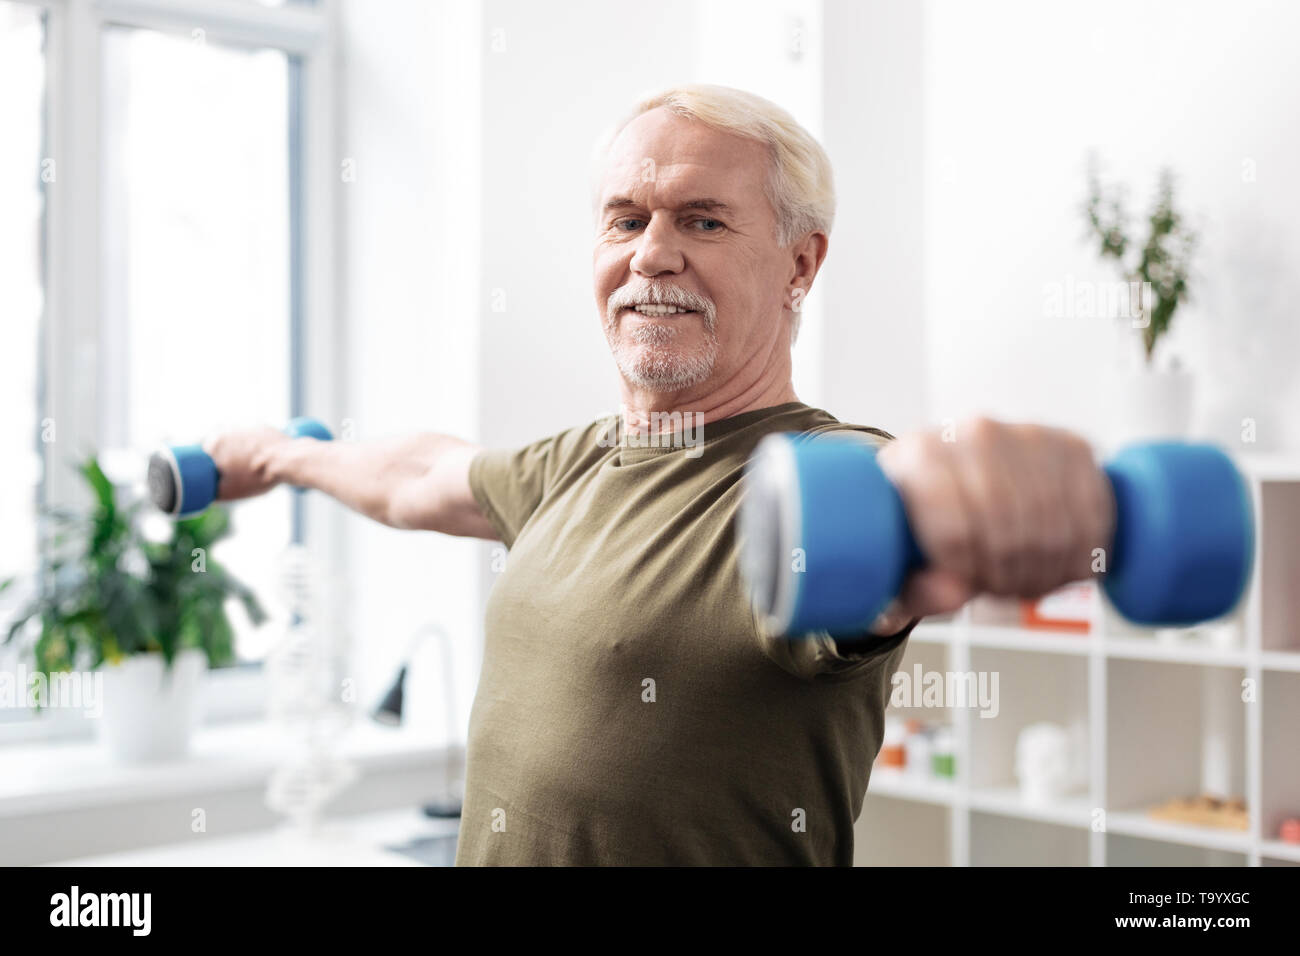 Nice active aged man practicing physical activities Stock Photo